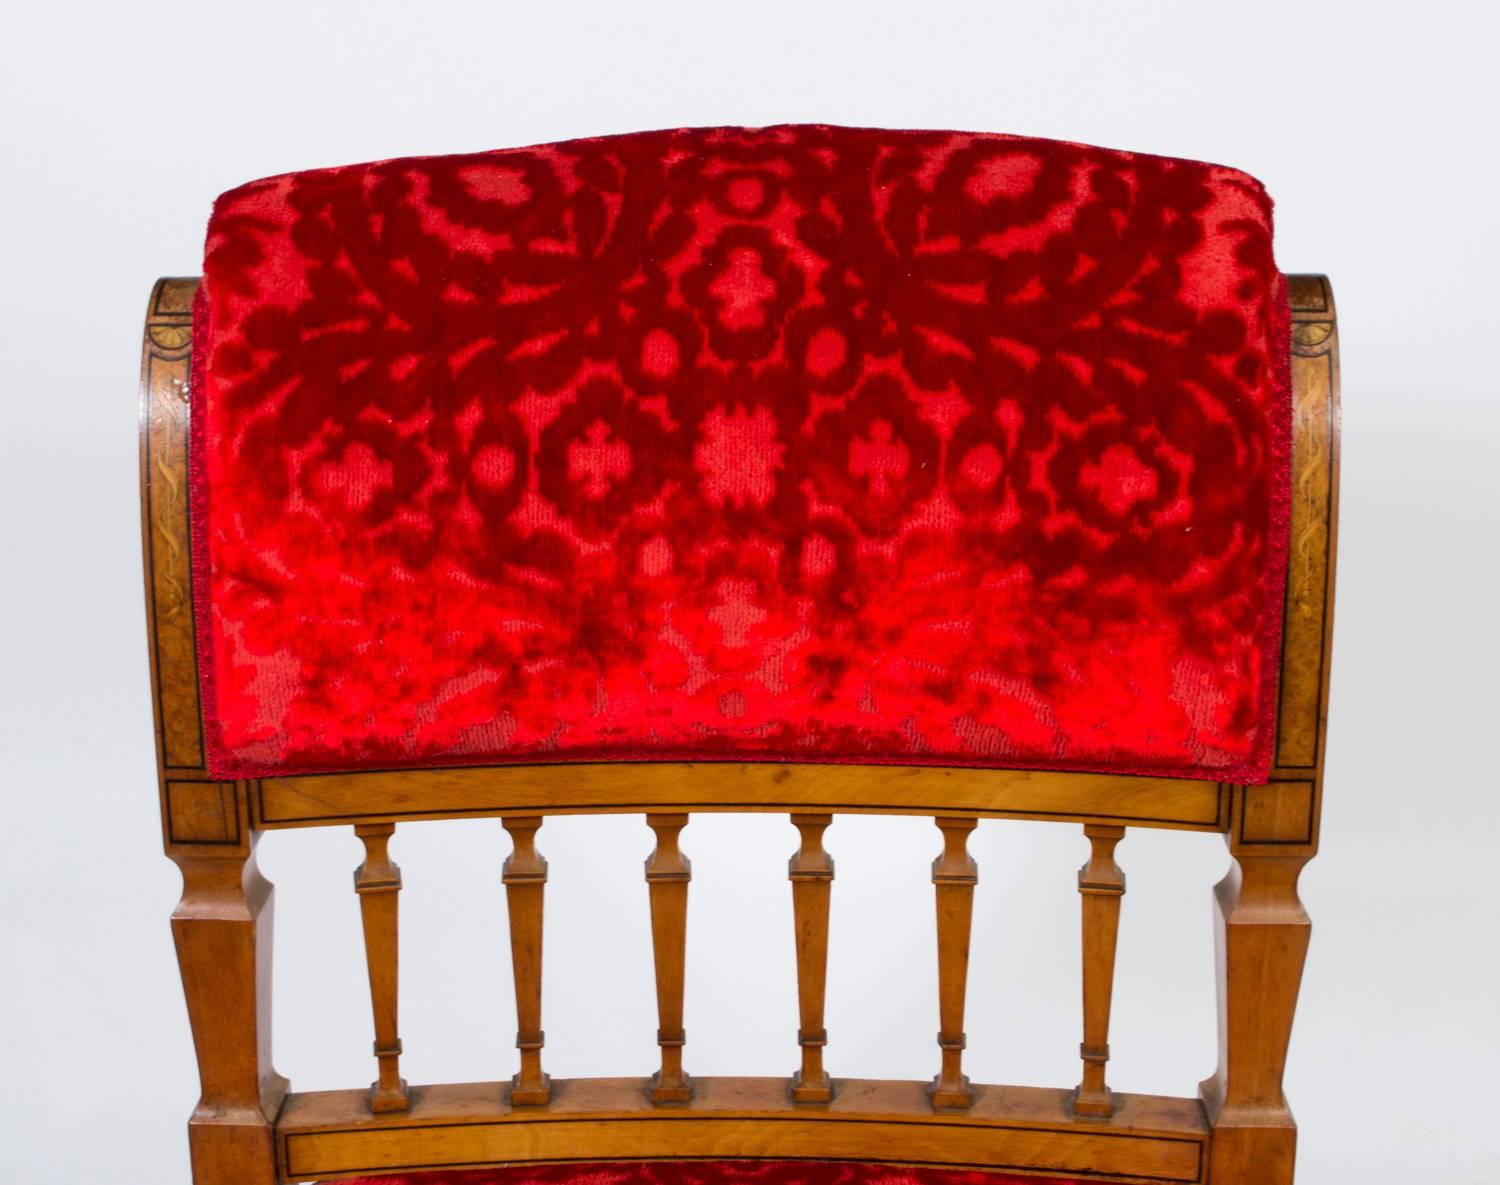 This is a lovely antique Victorian nursing chair, circa 1880 in date, made from solid satinwood and beautifully inlaid.

The chair has been beautifully reupholstered in a red velvet fabric with embossed floral patterns in the same colour. 

It